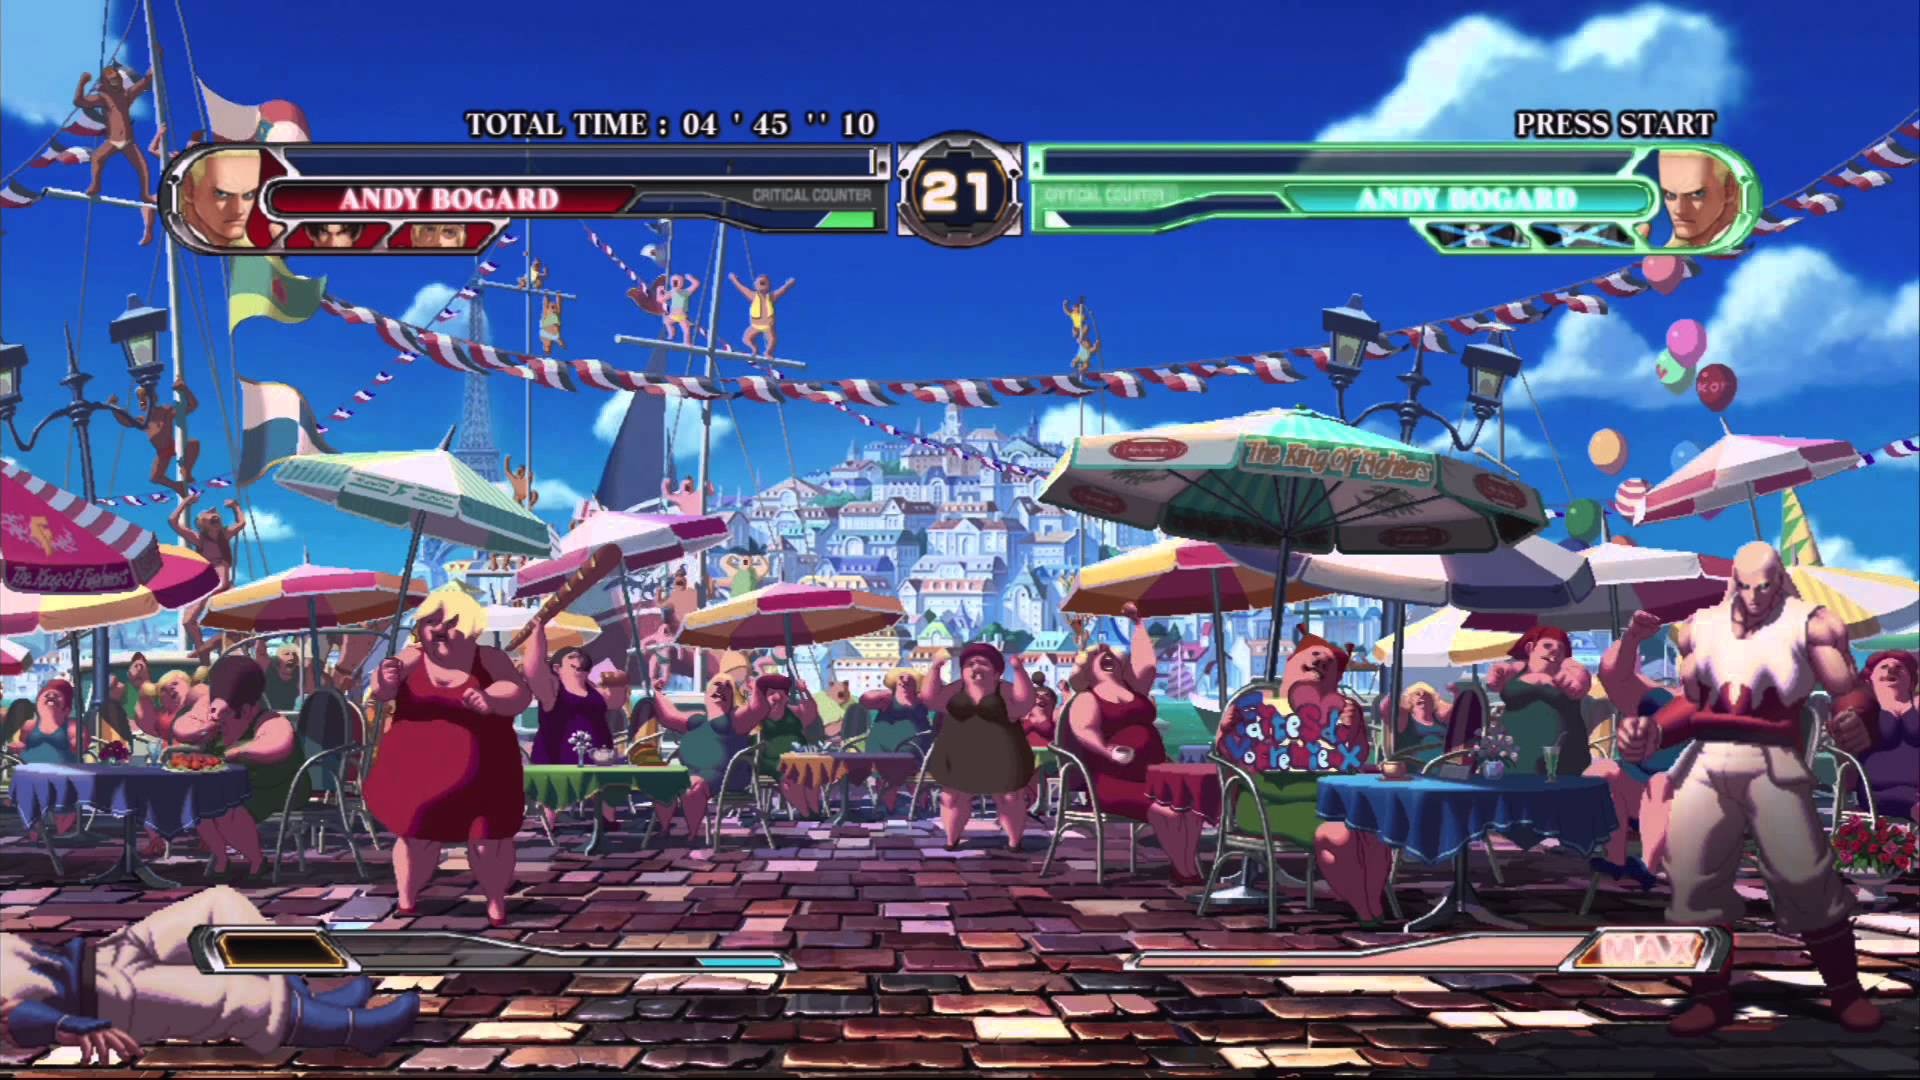 Wallpapers HD Terry Bogard King Of Fighters 99 (58+ images)